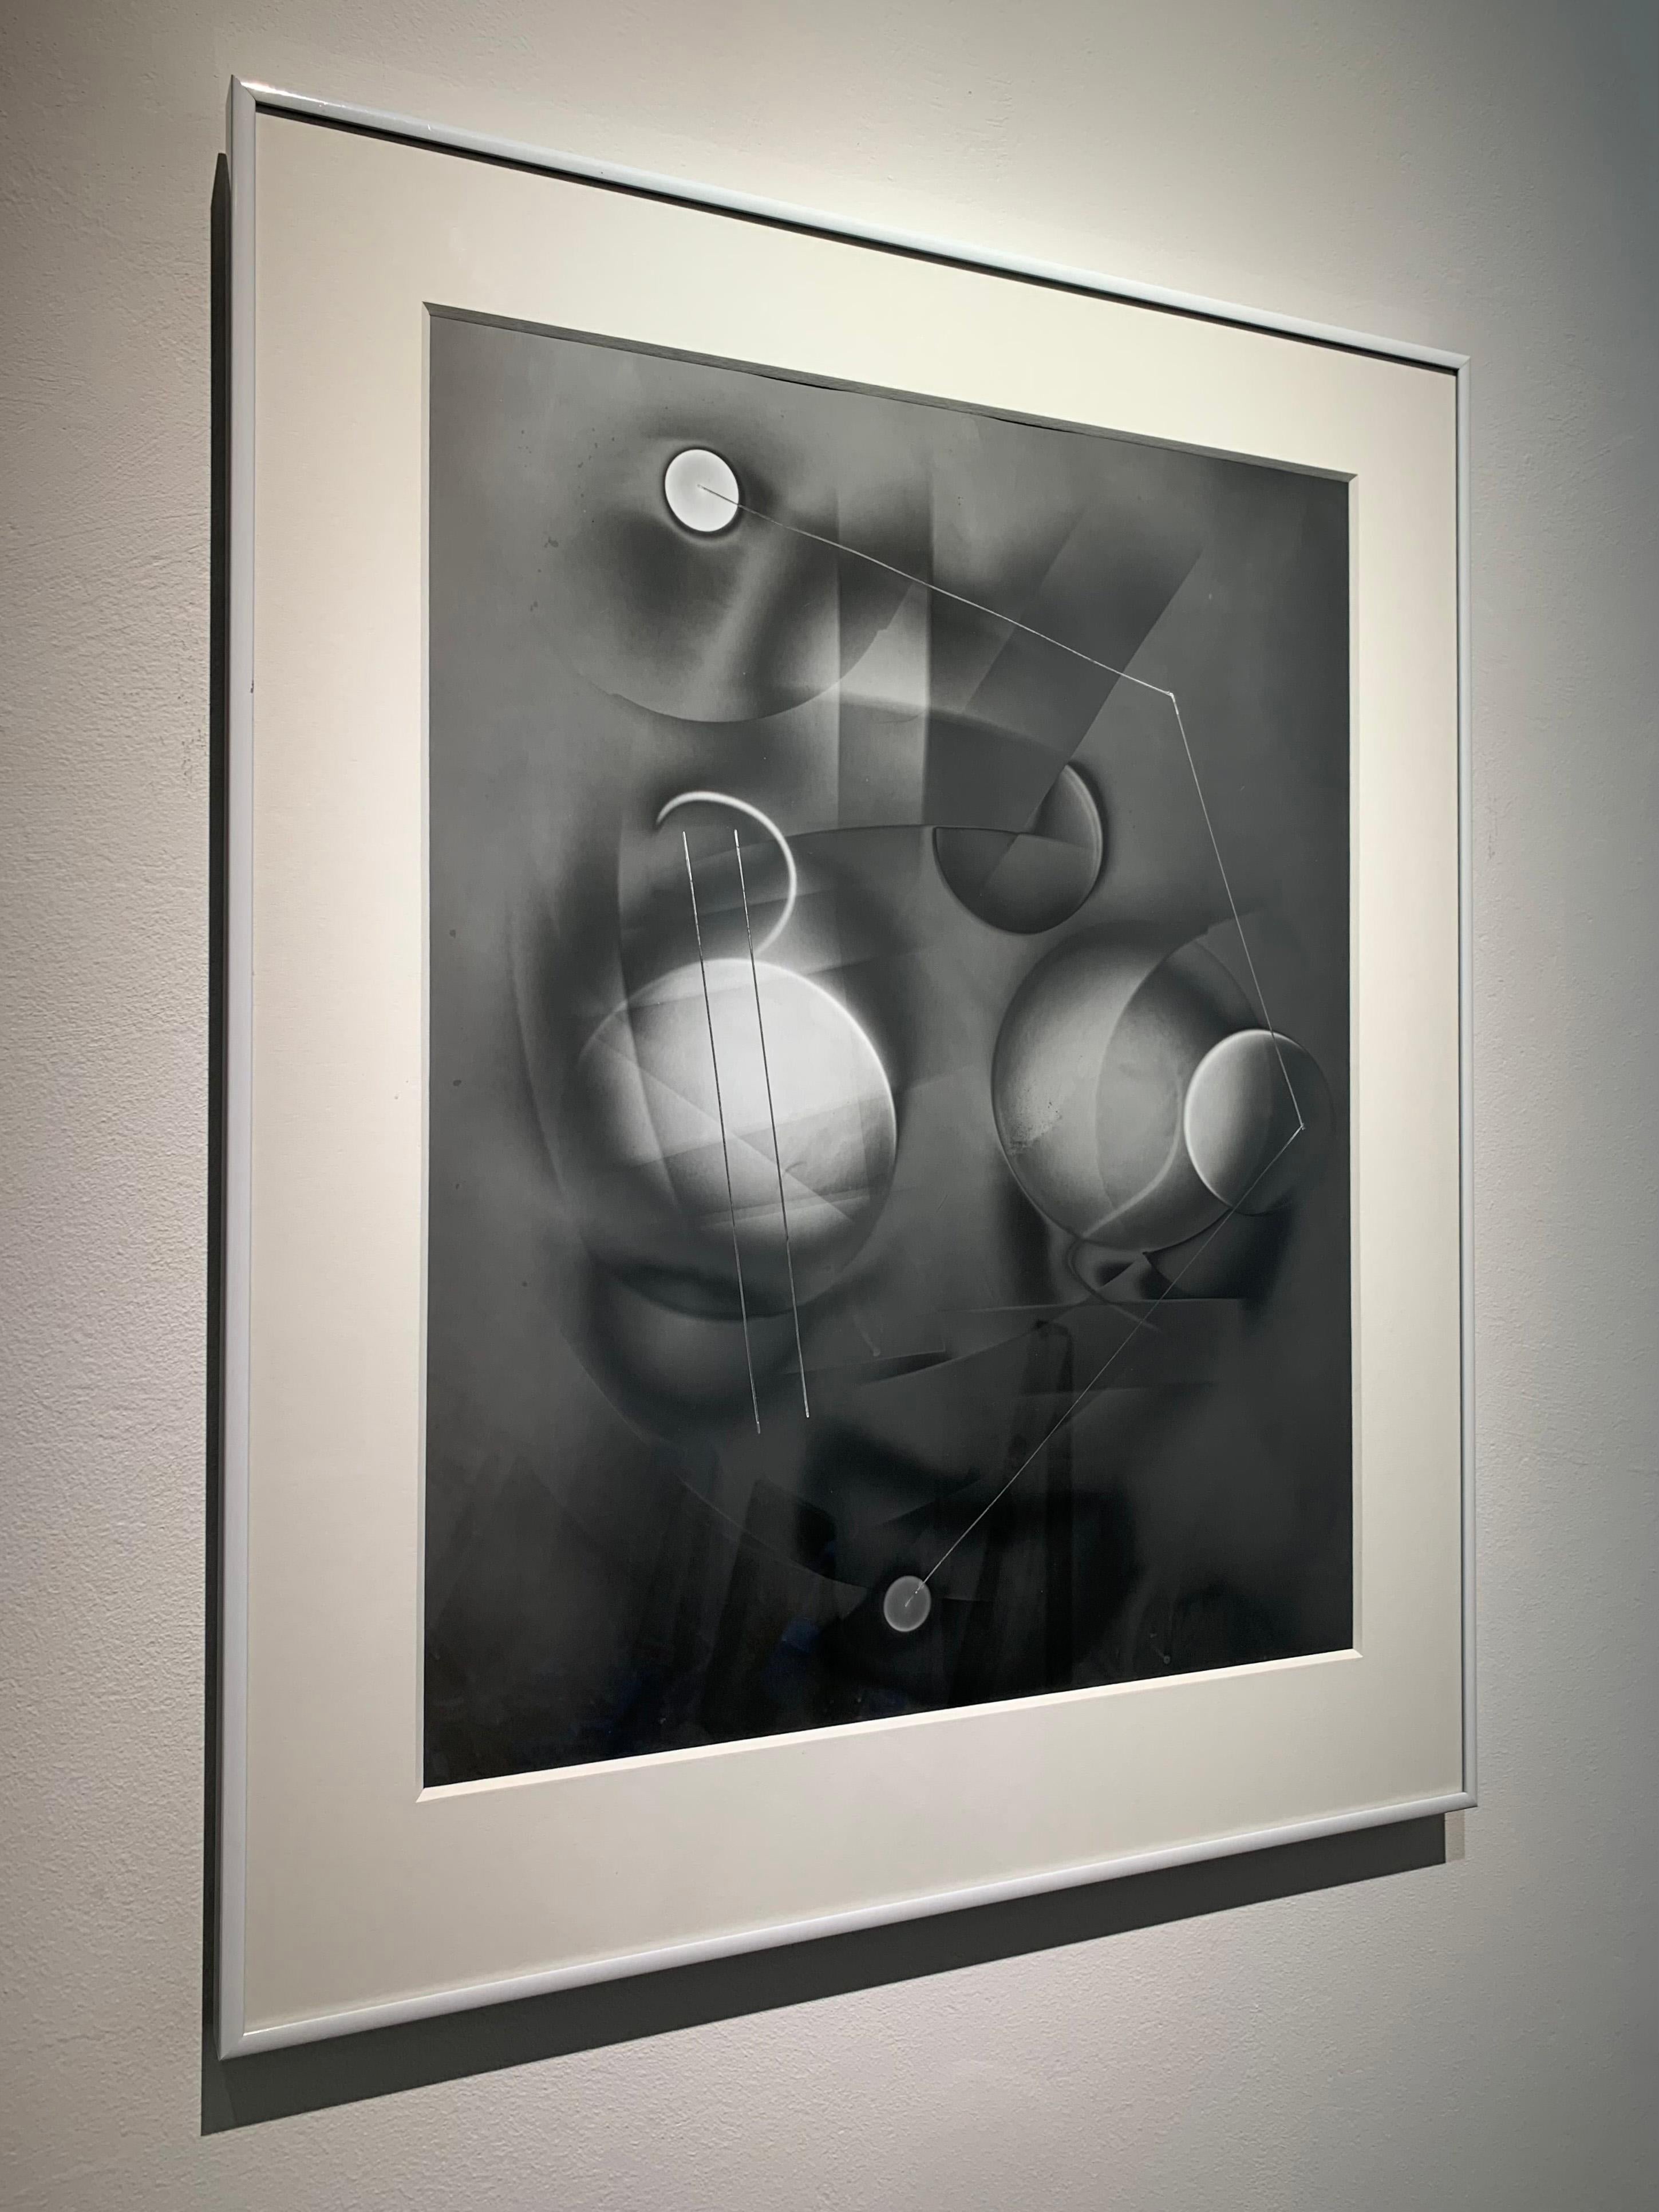 Near the Church - abstract black and white landscape depicted in the Luminogram - Abstract Geometric Photograph by Michael G Jackson